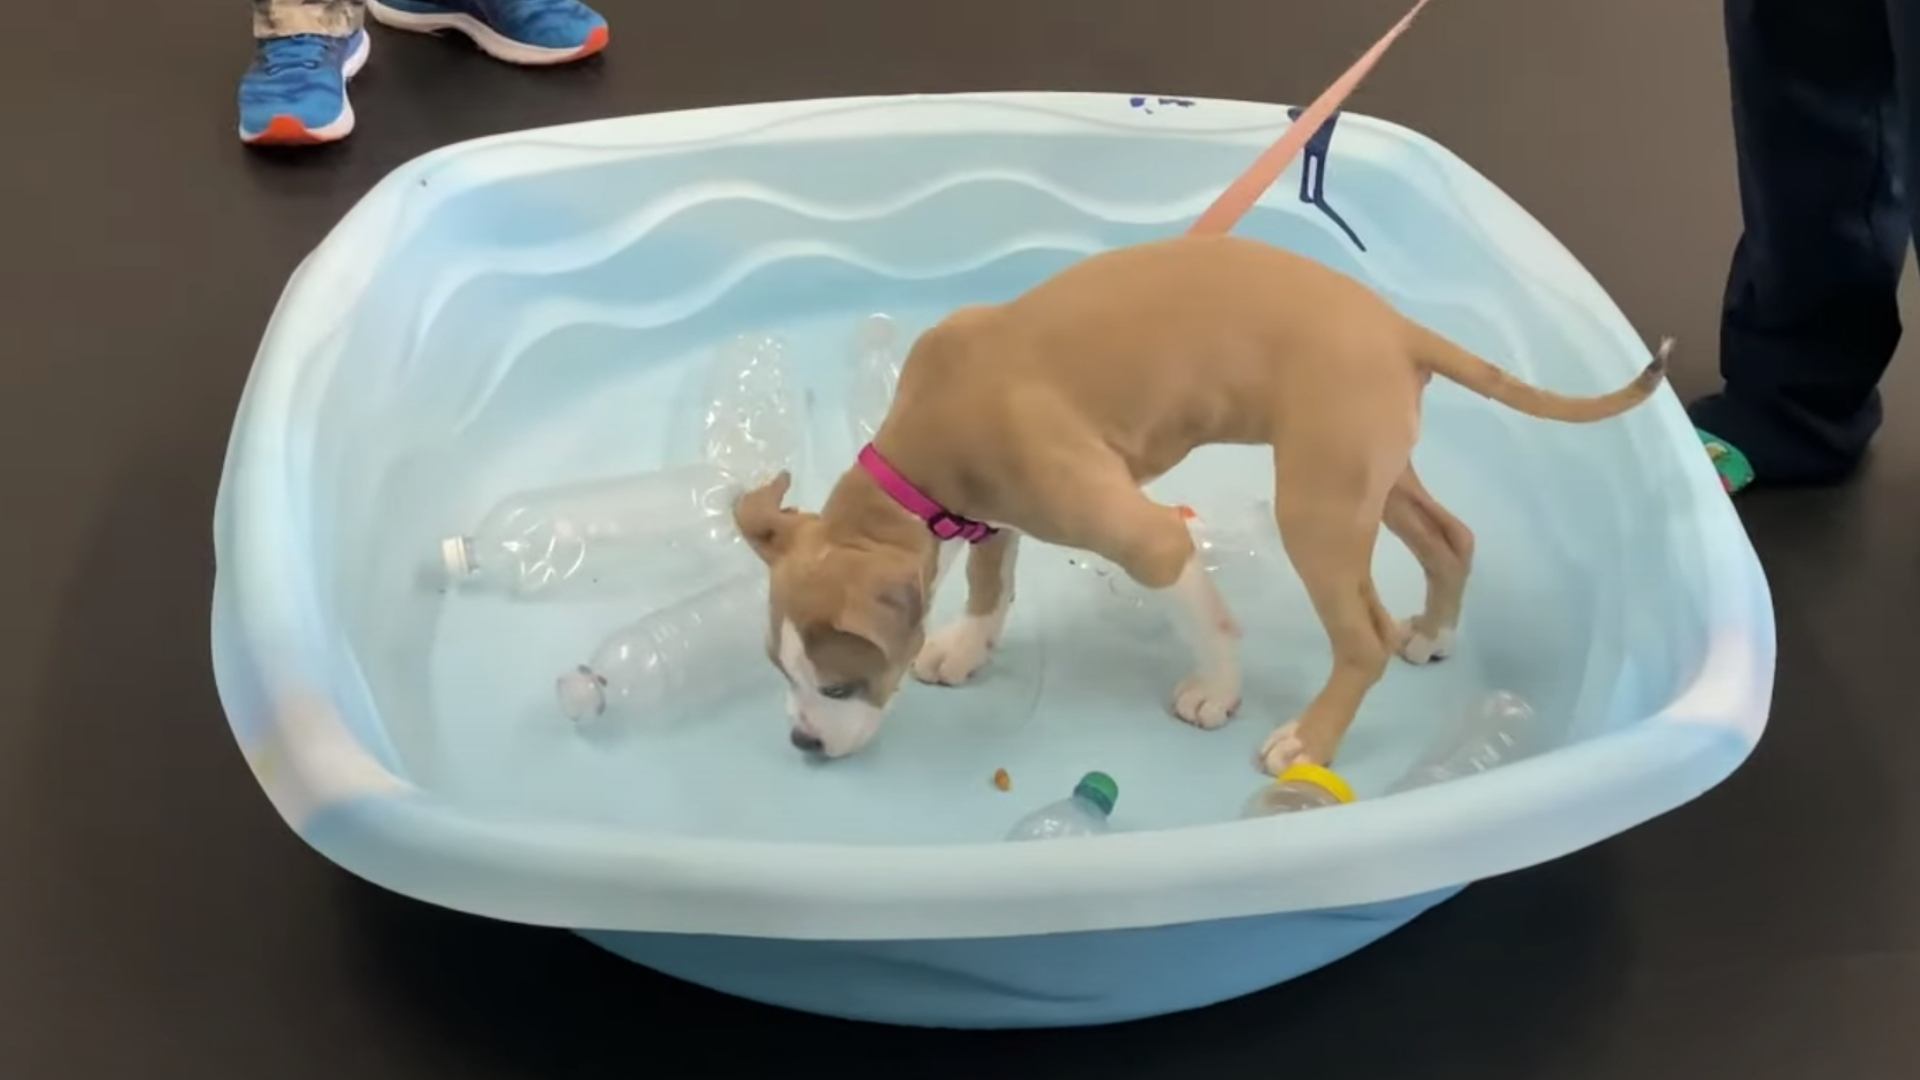 puppy and bottles in a kiddie pool 